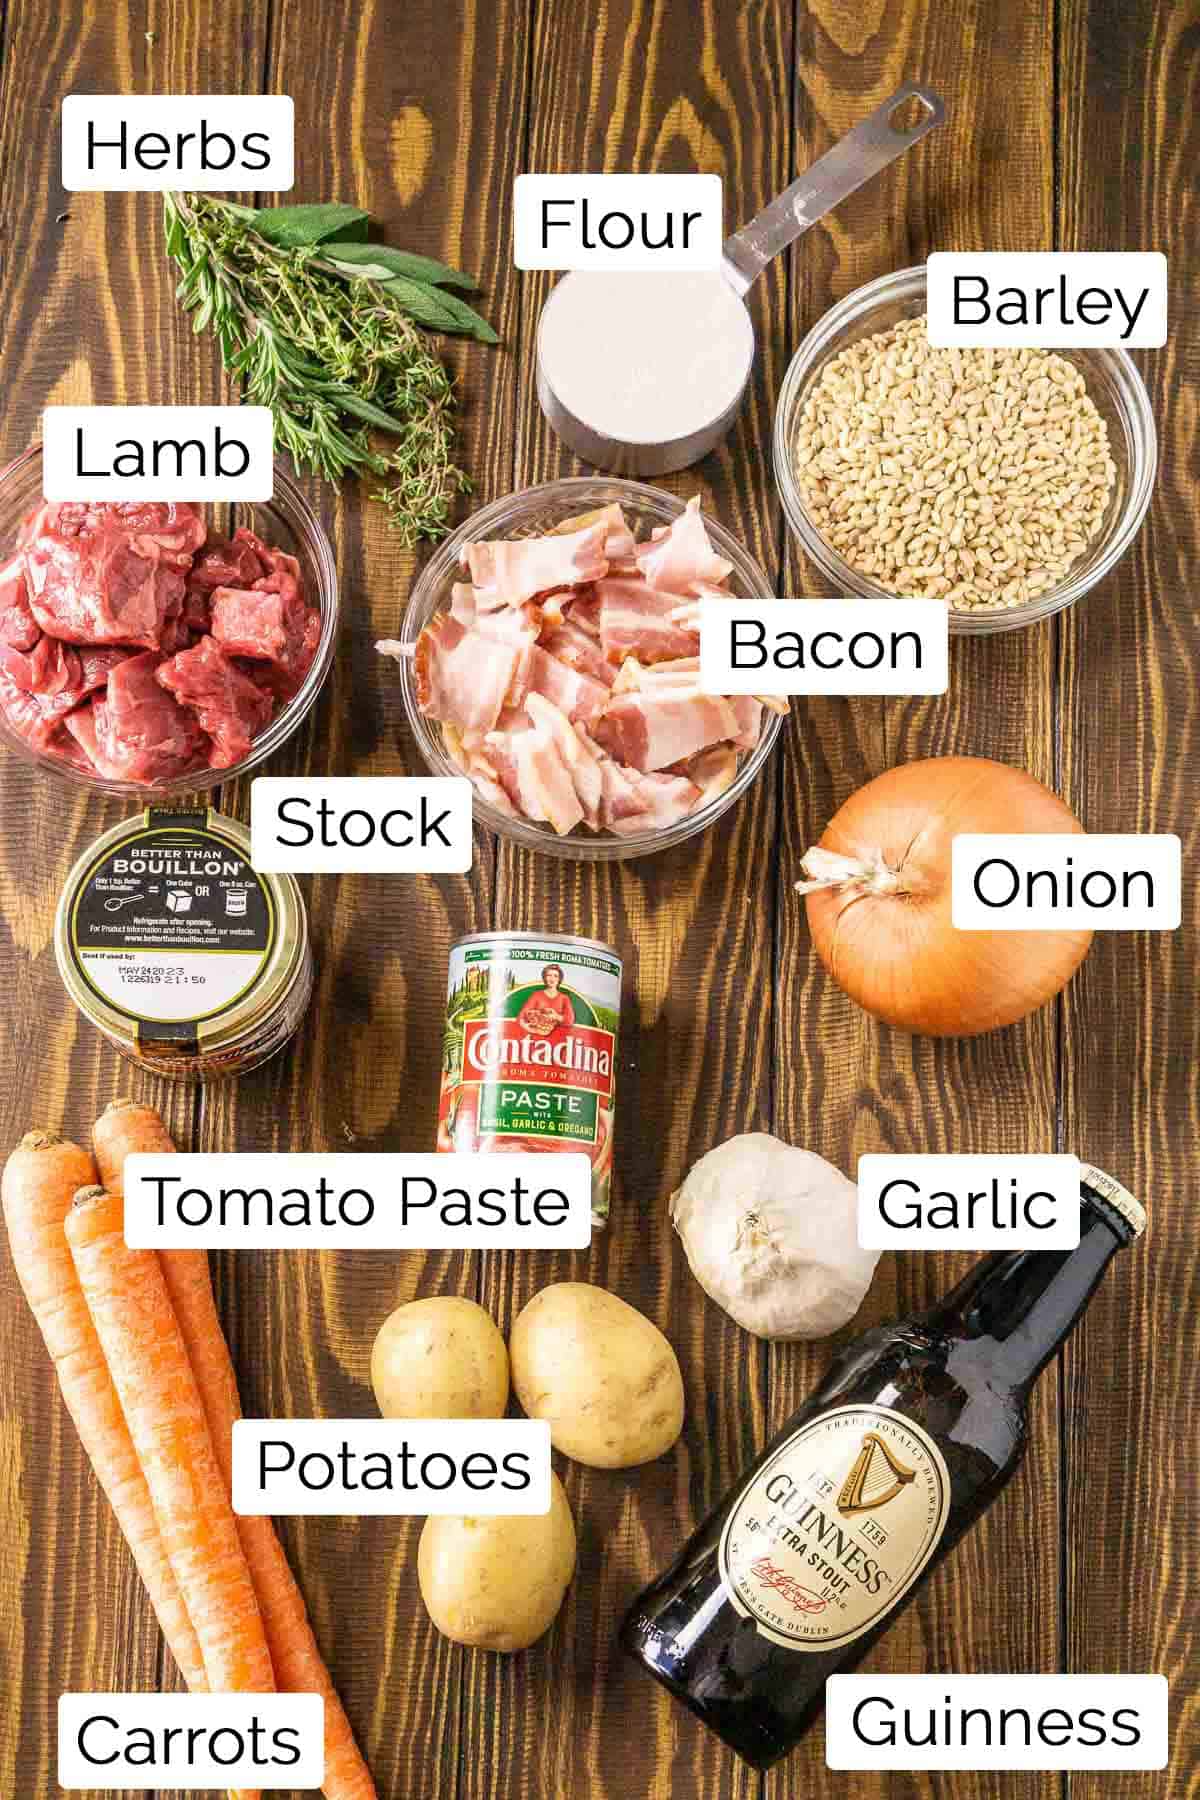 The Guinness lamb stew ingredients with labels on a wooden surface.